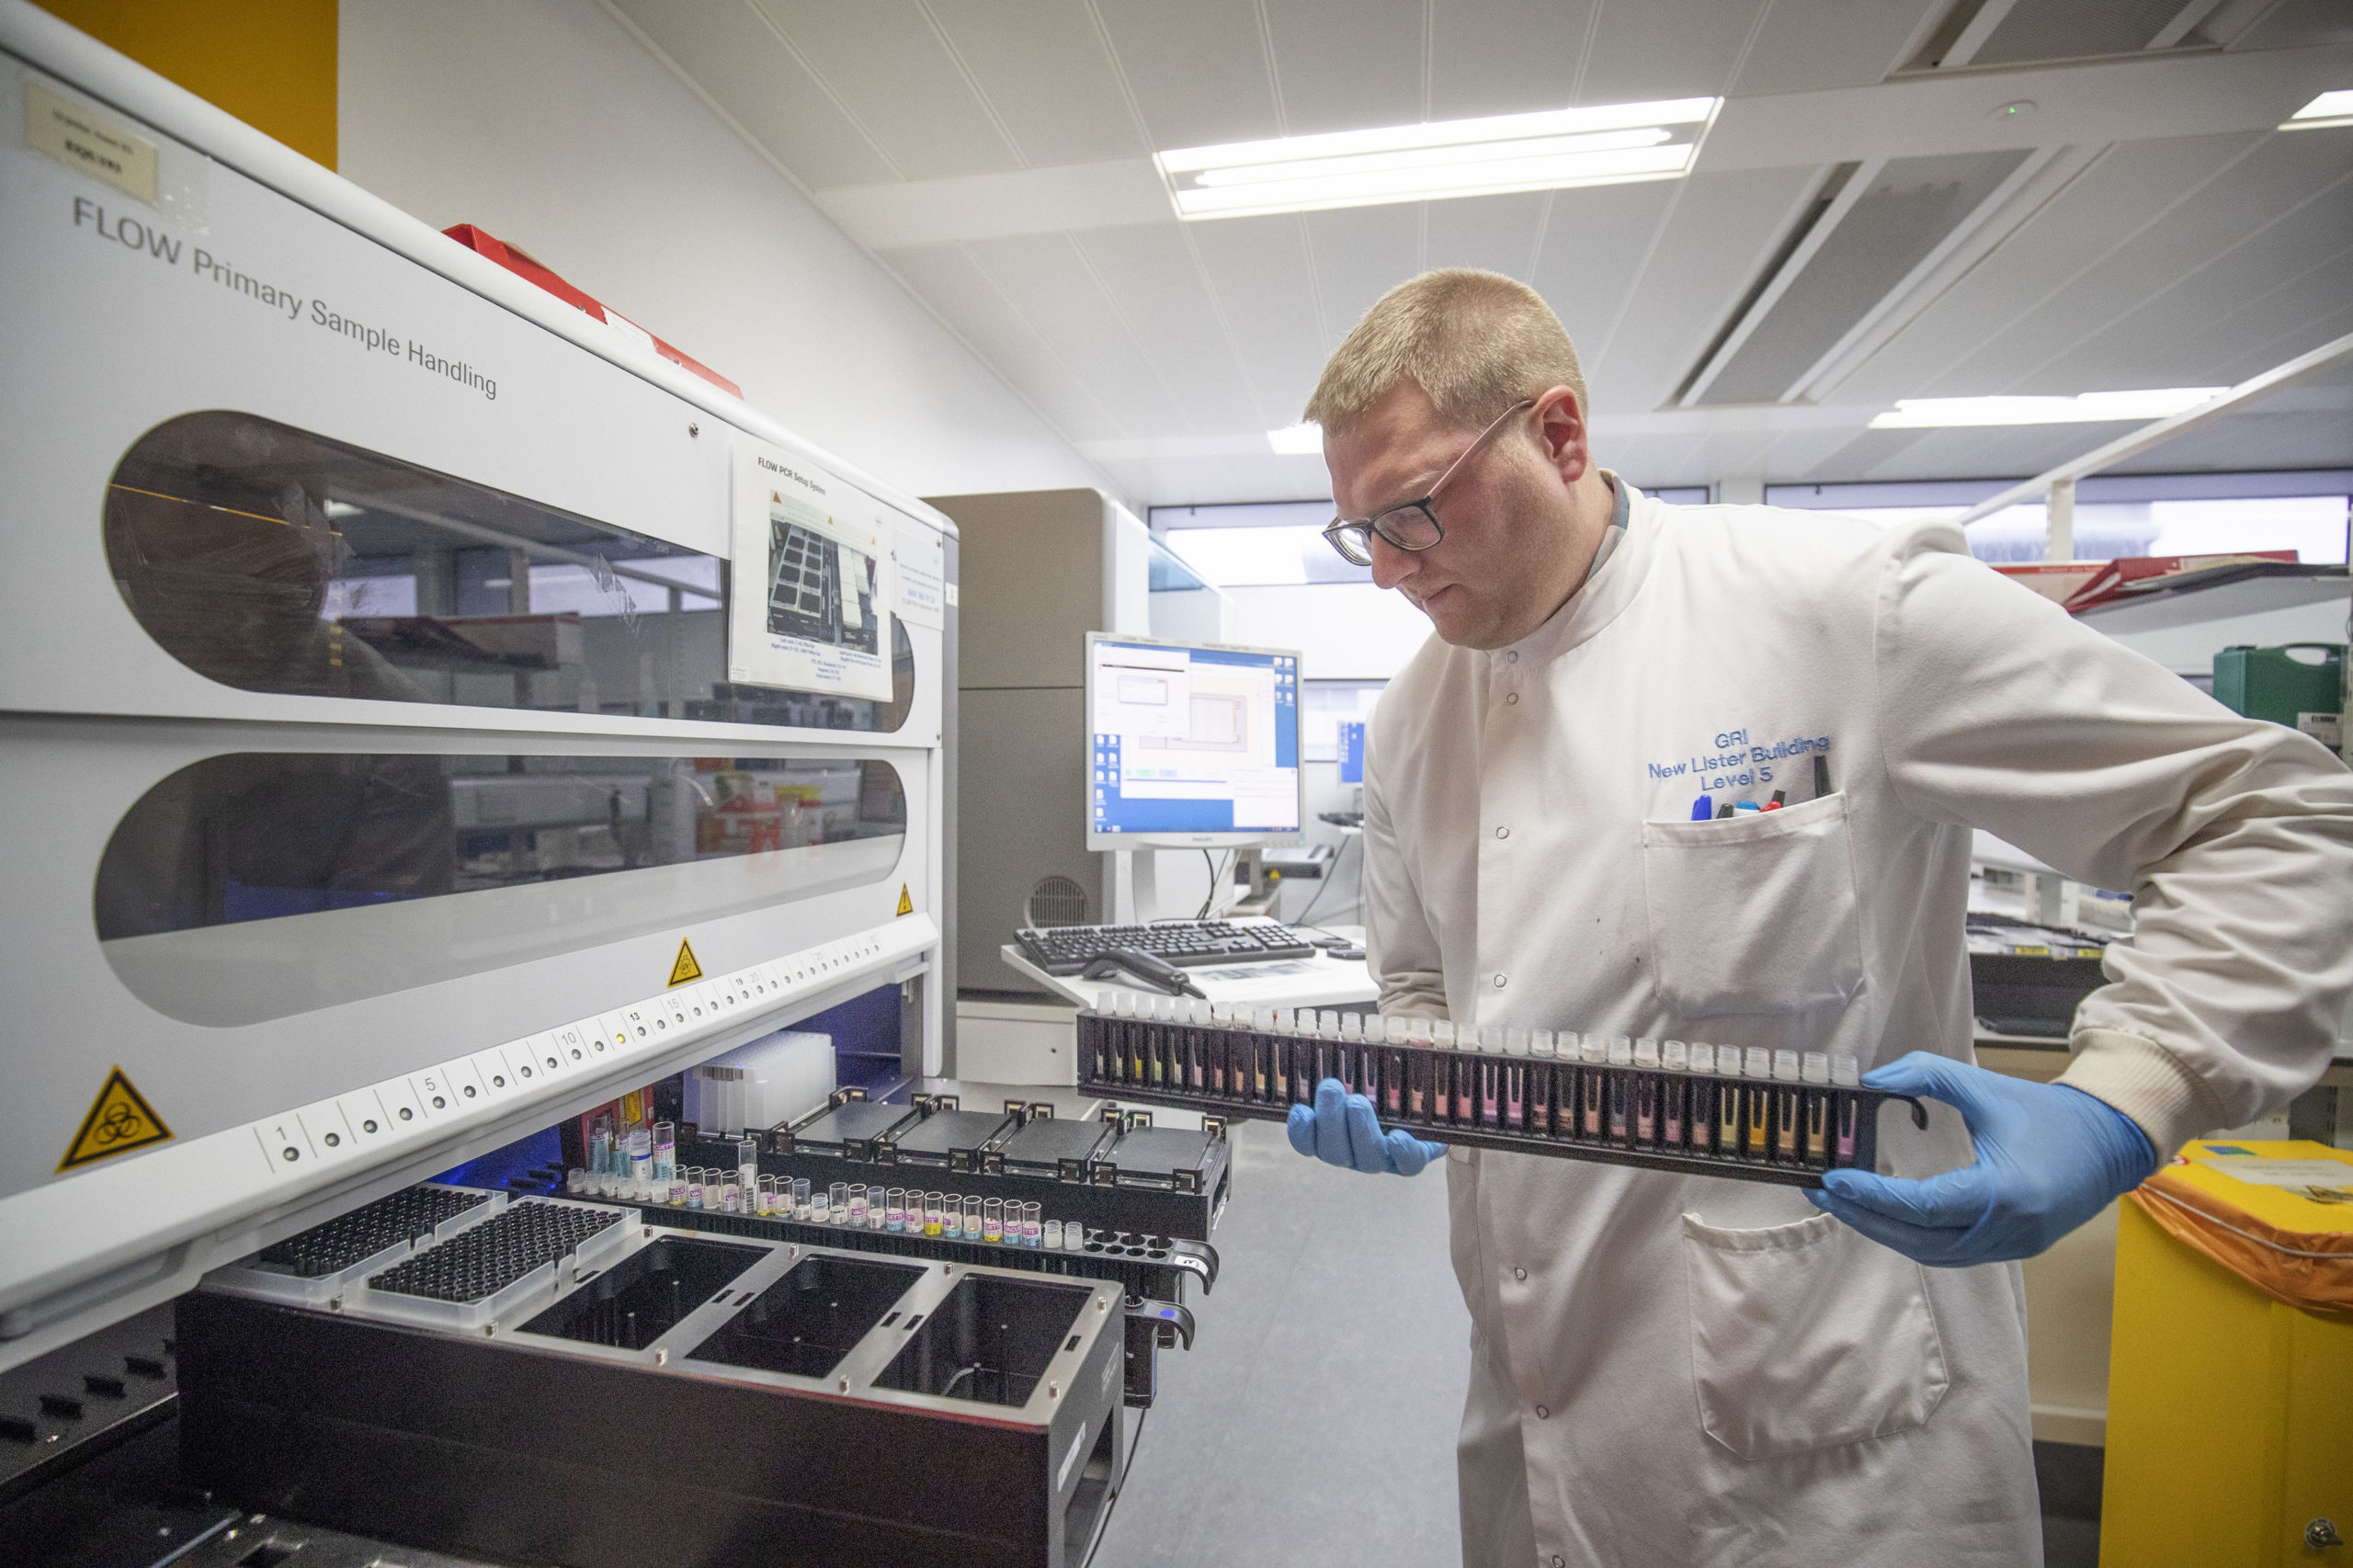 Clinical support technician Douglas Condie extracts viruses from swab samples so that the genetic structure of a virus can be analysed and identified in the coronavirus testing laboratory at Glasgow Royal Infirmary, Glasgow.